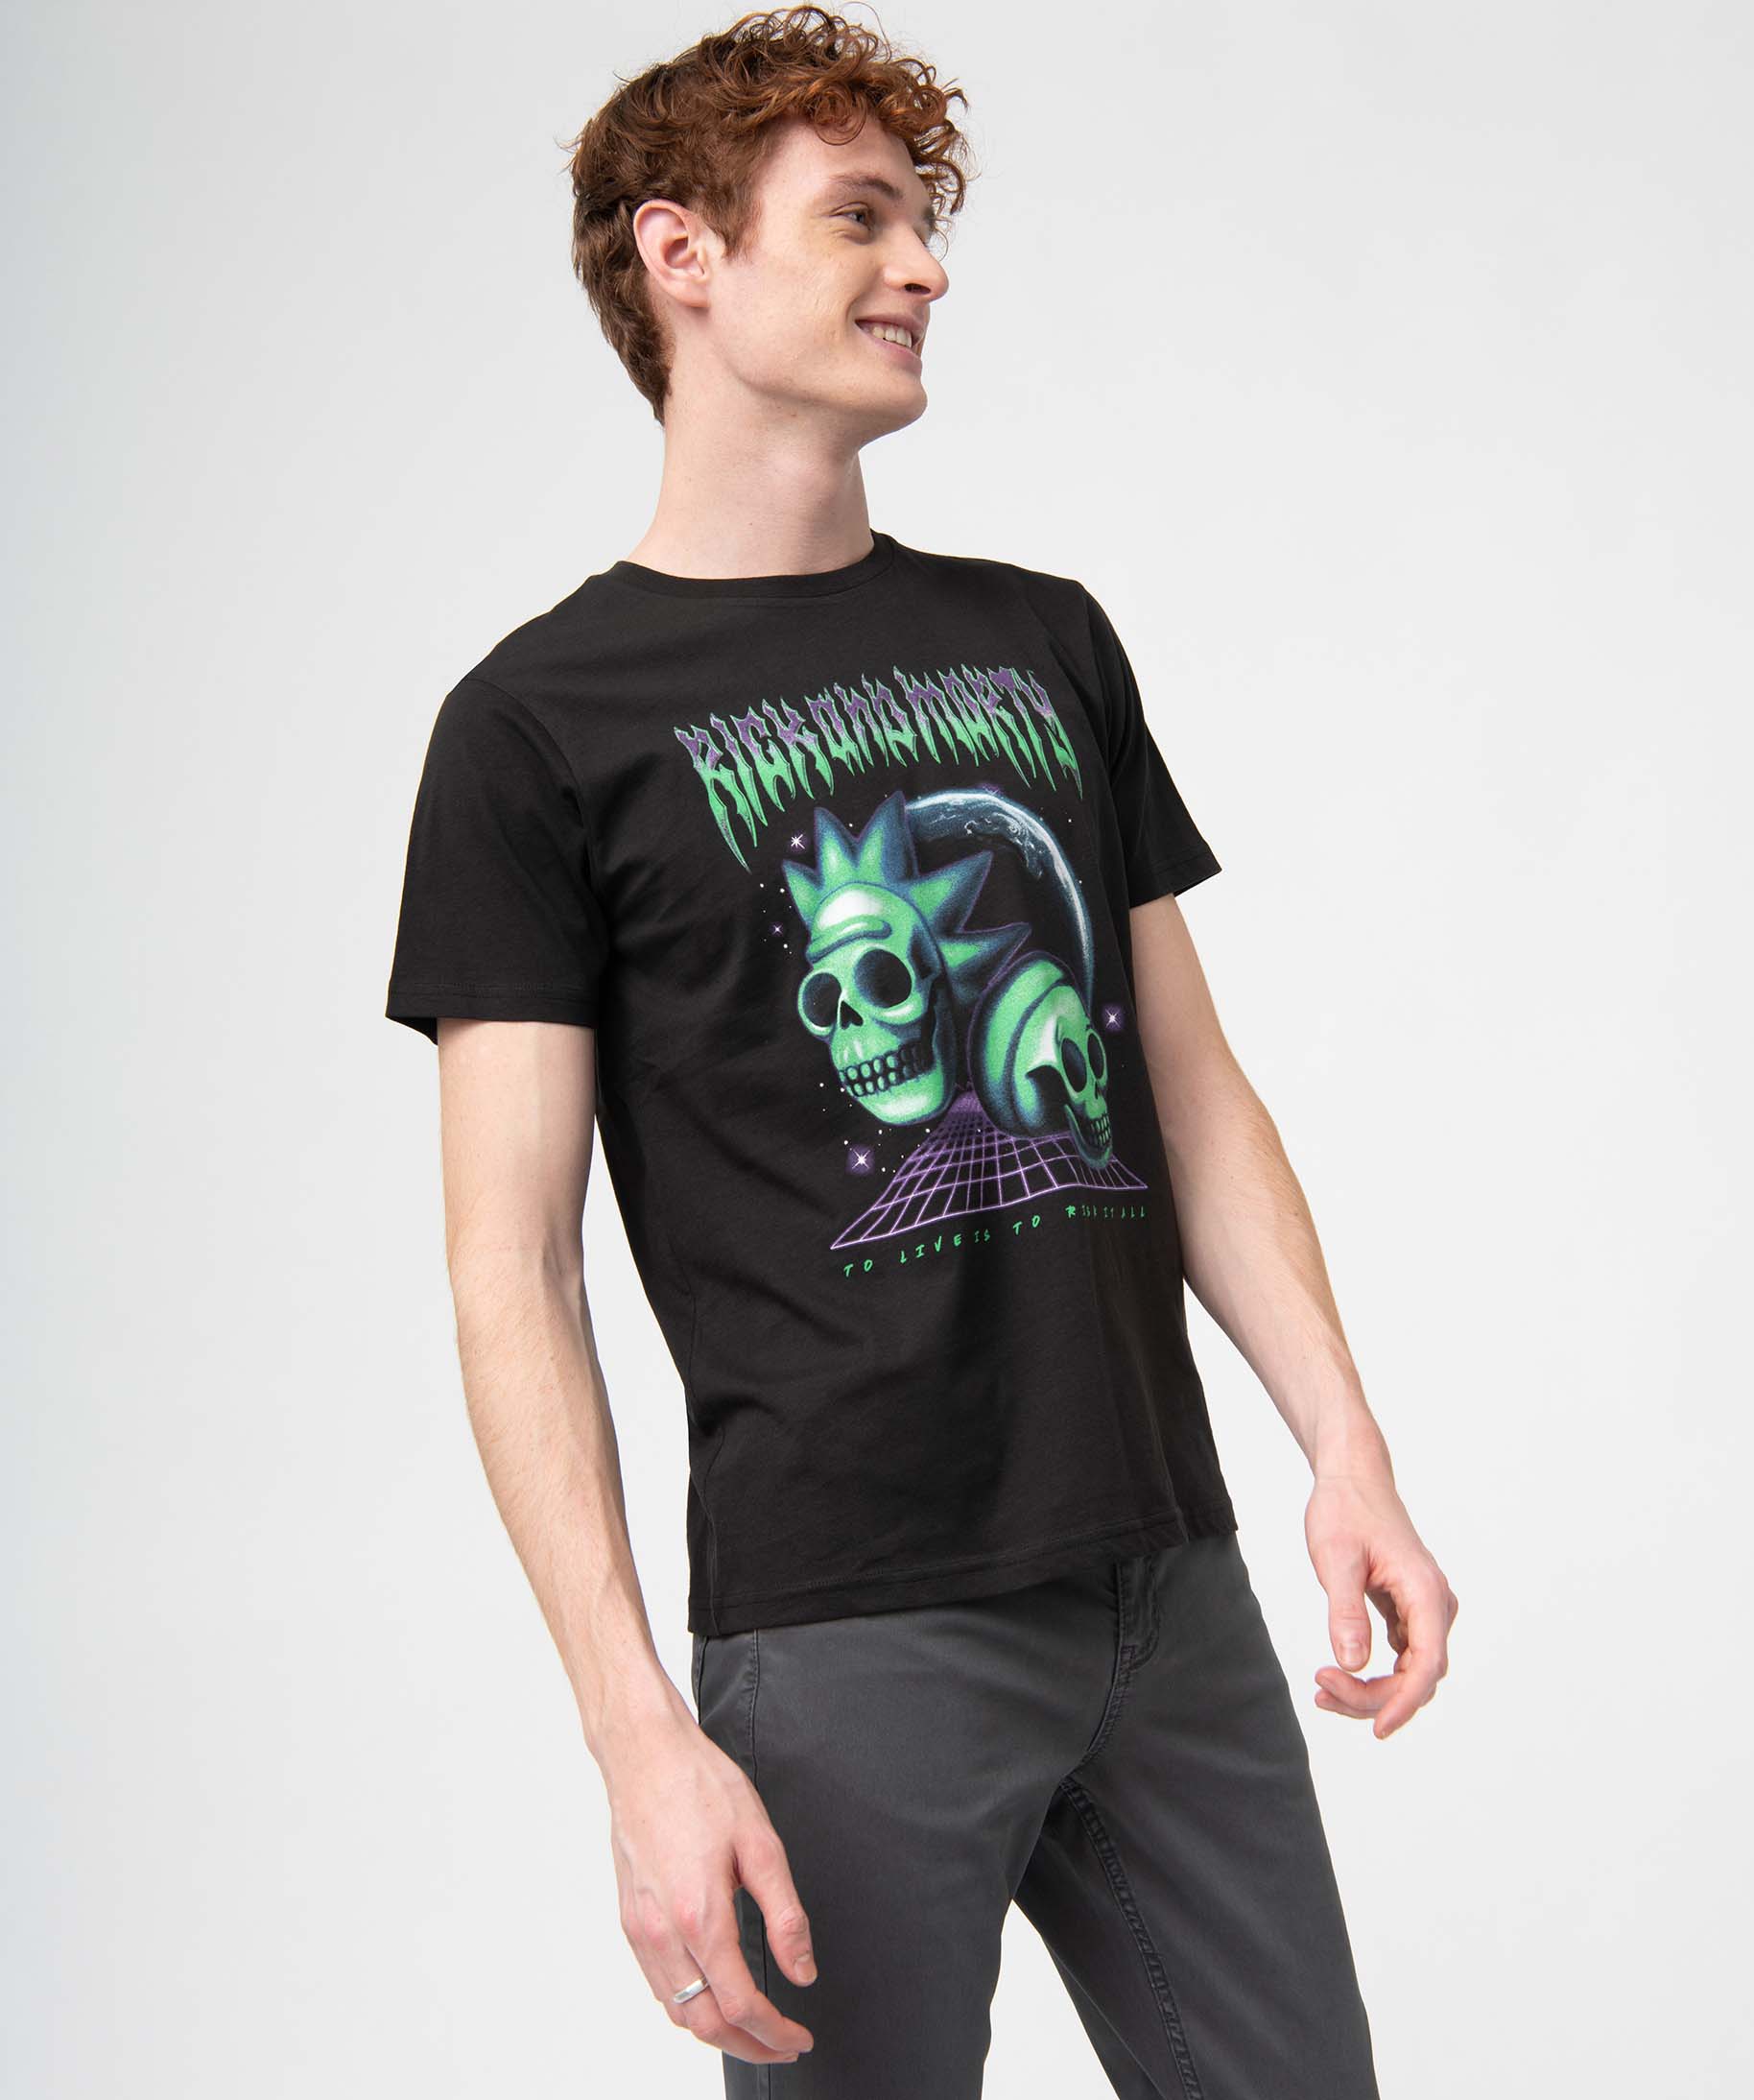 tee-shirt homme a manches coures imprime- rick morty noir tee-shirts